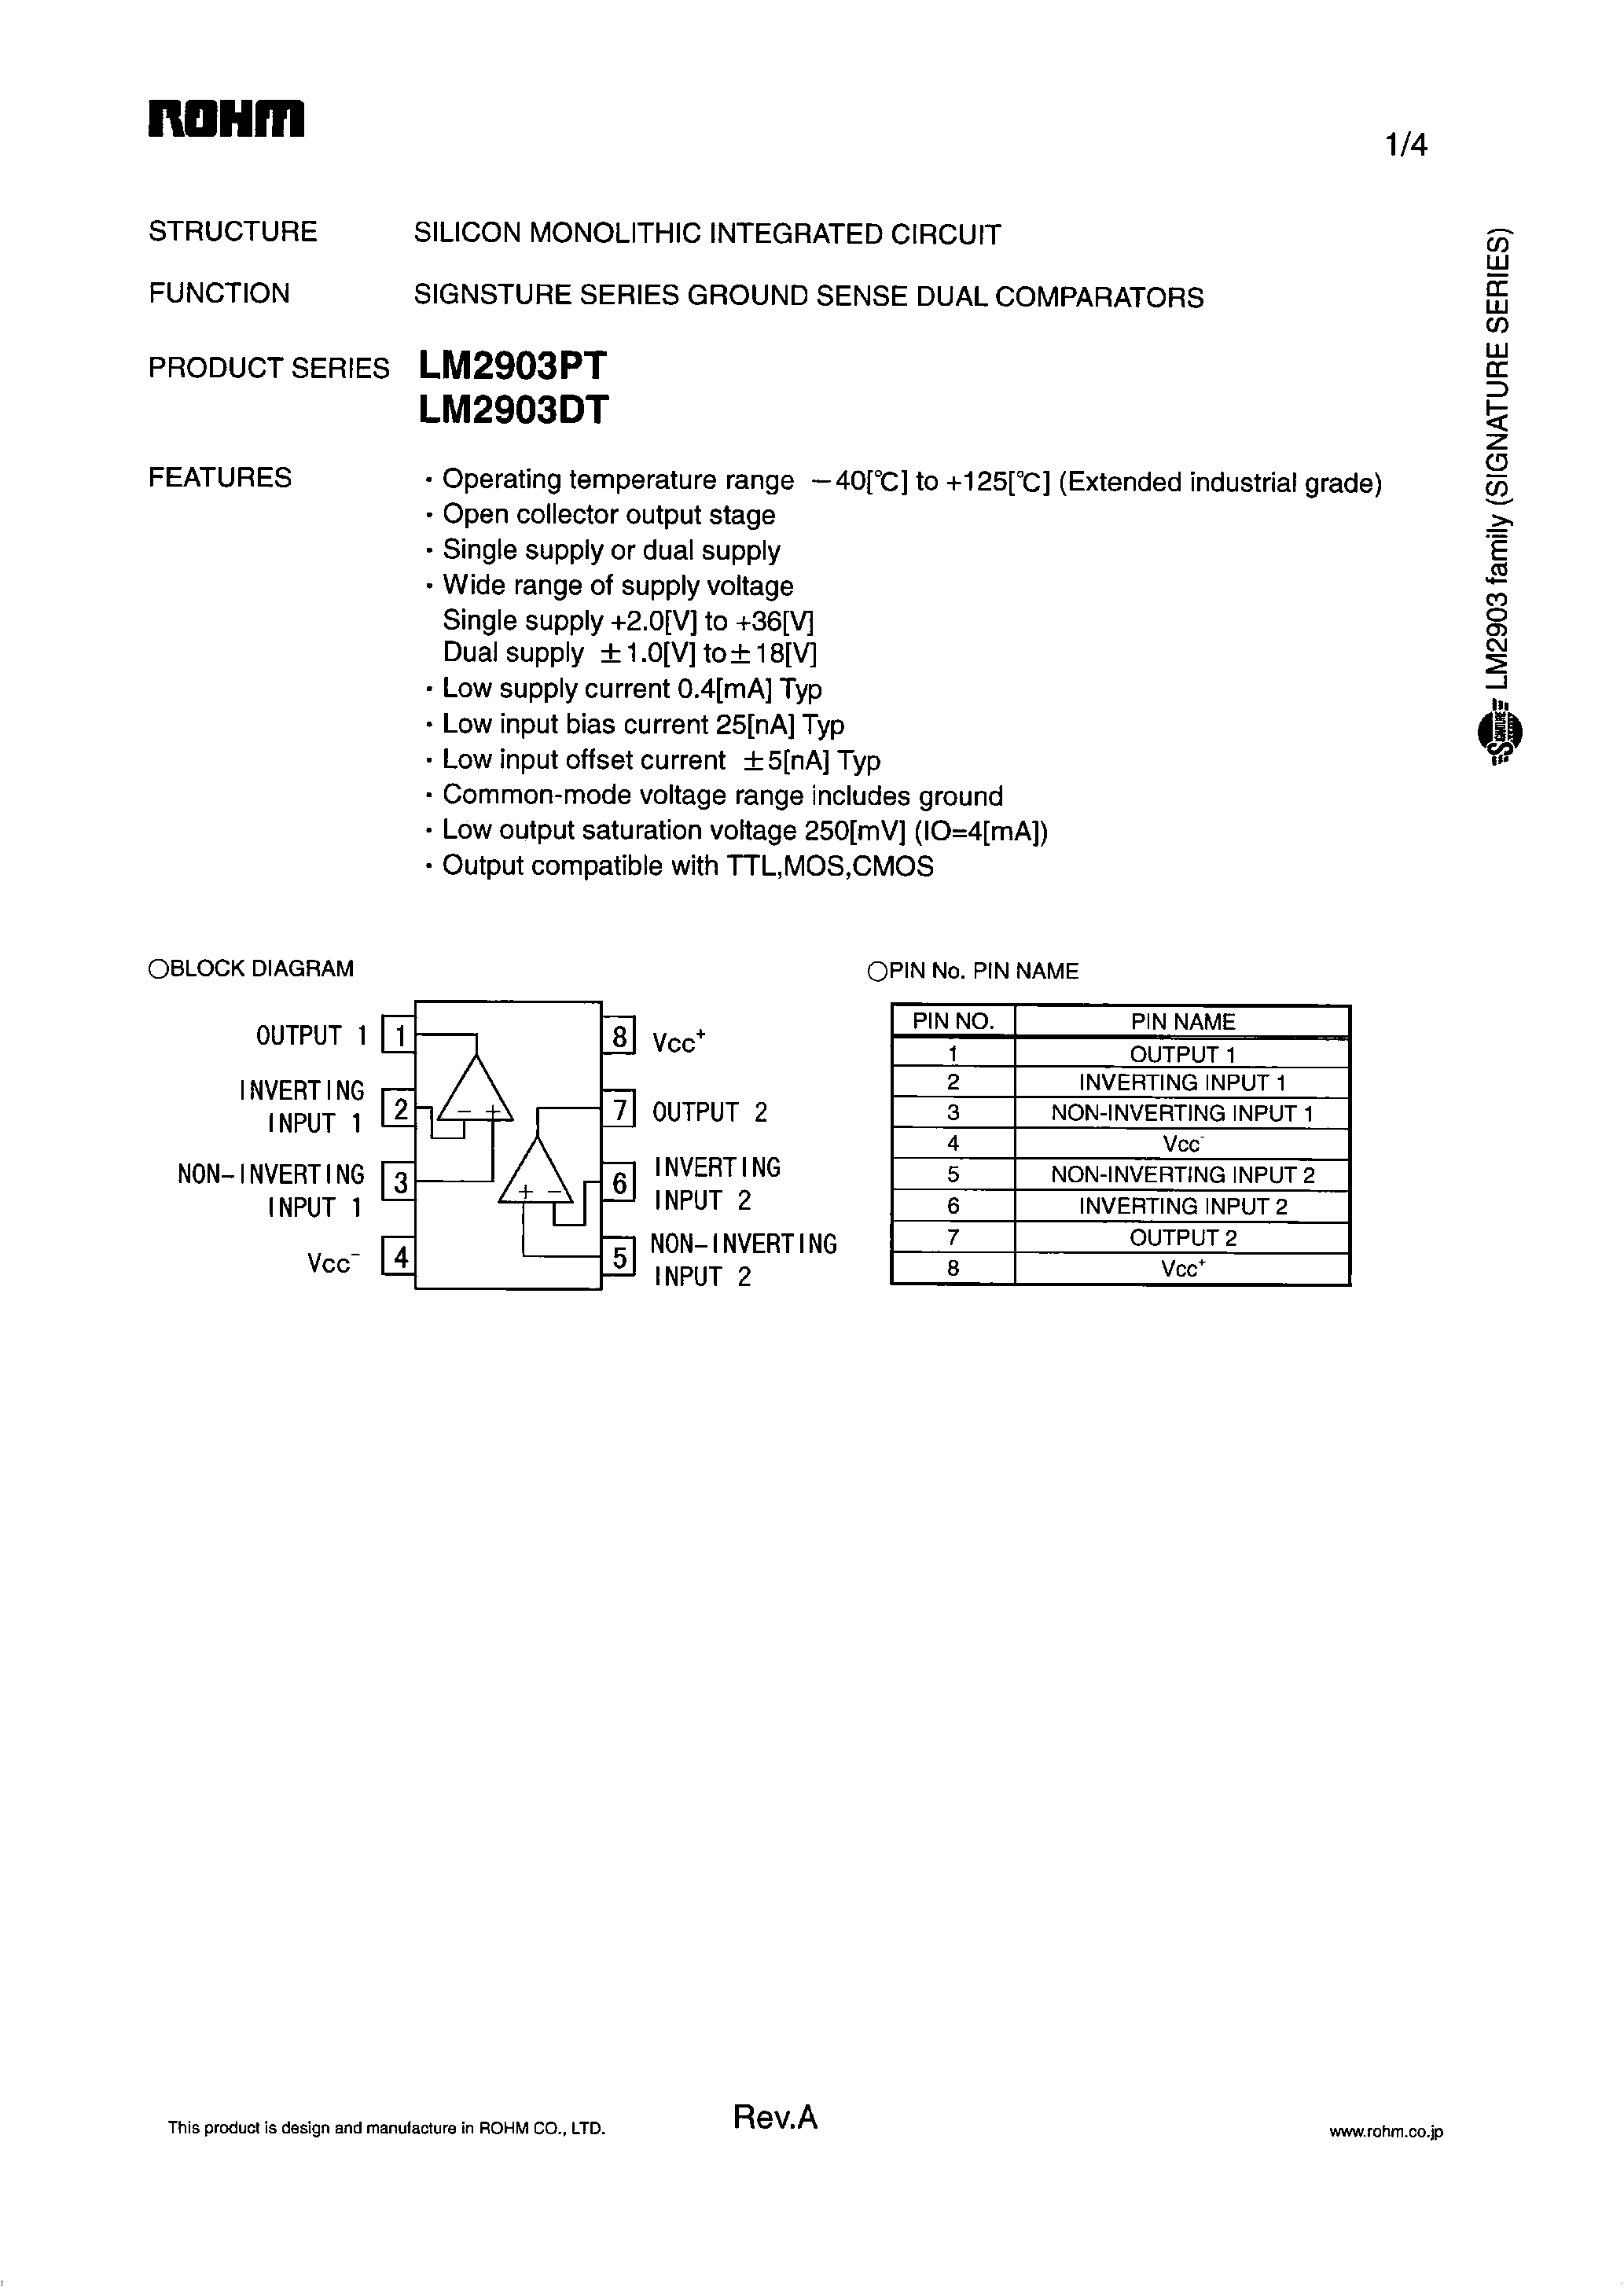 Datasheet LM2903DT - (LM2903DT / LM2903PT) SILICON MONNOLITHIC INTEGRATED CIRCUIT page 1